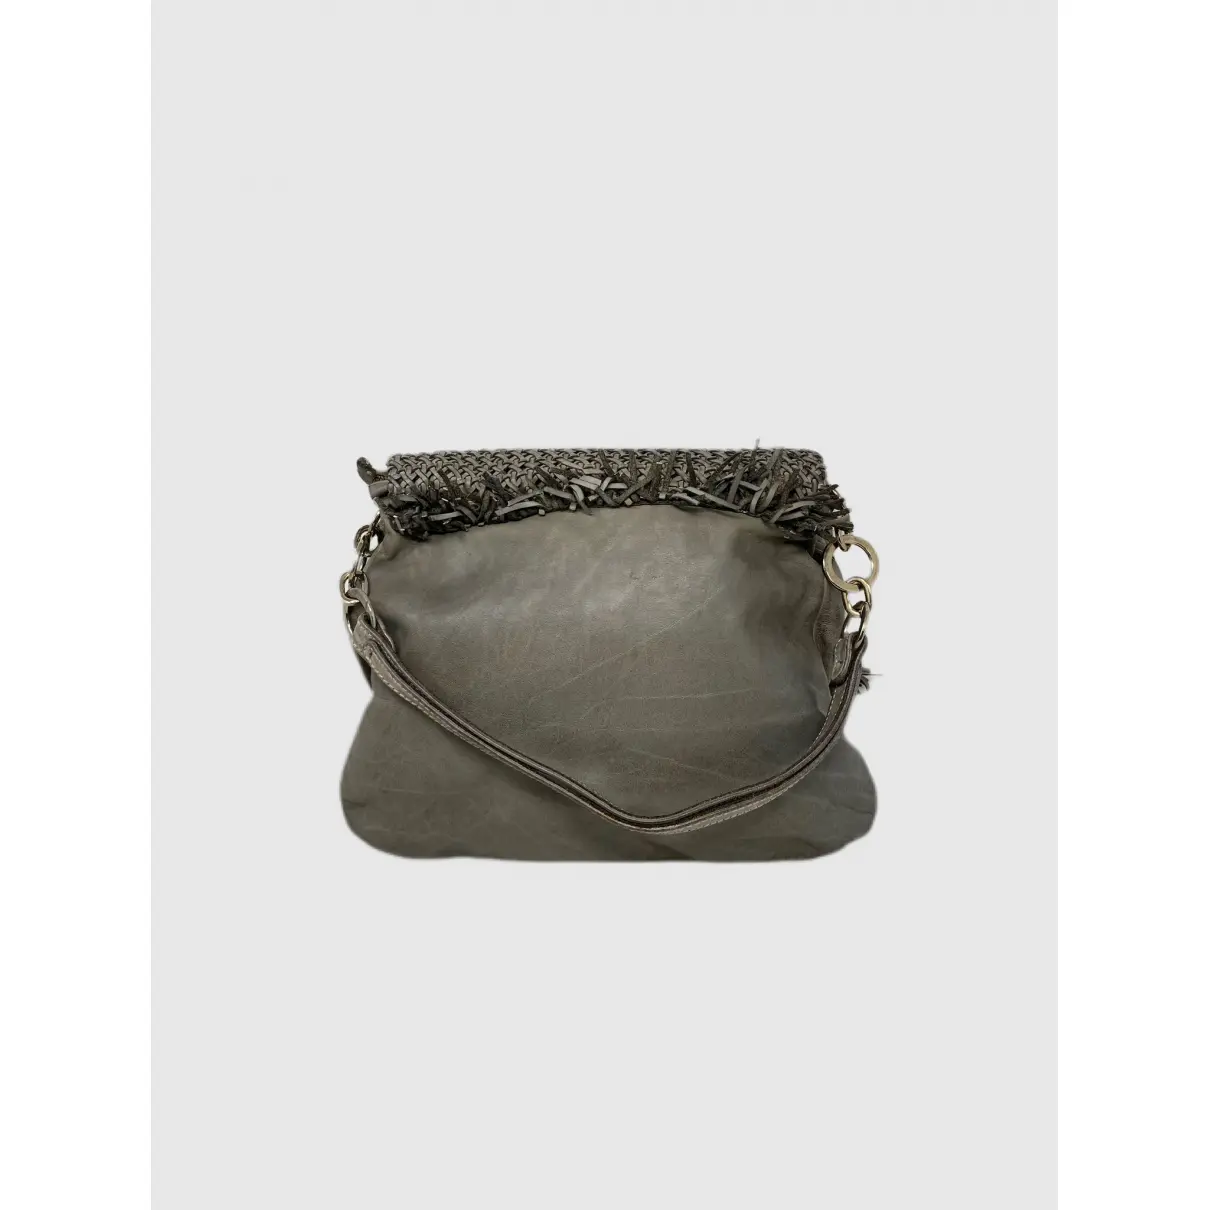 Buy Reptile's House Leather crossbody bag online